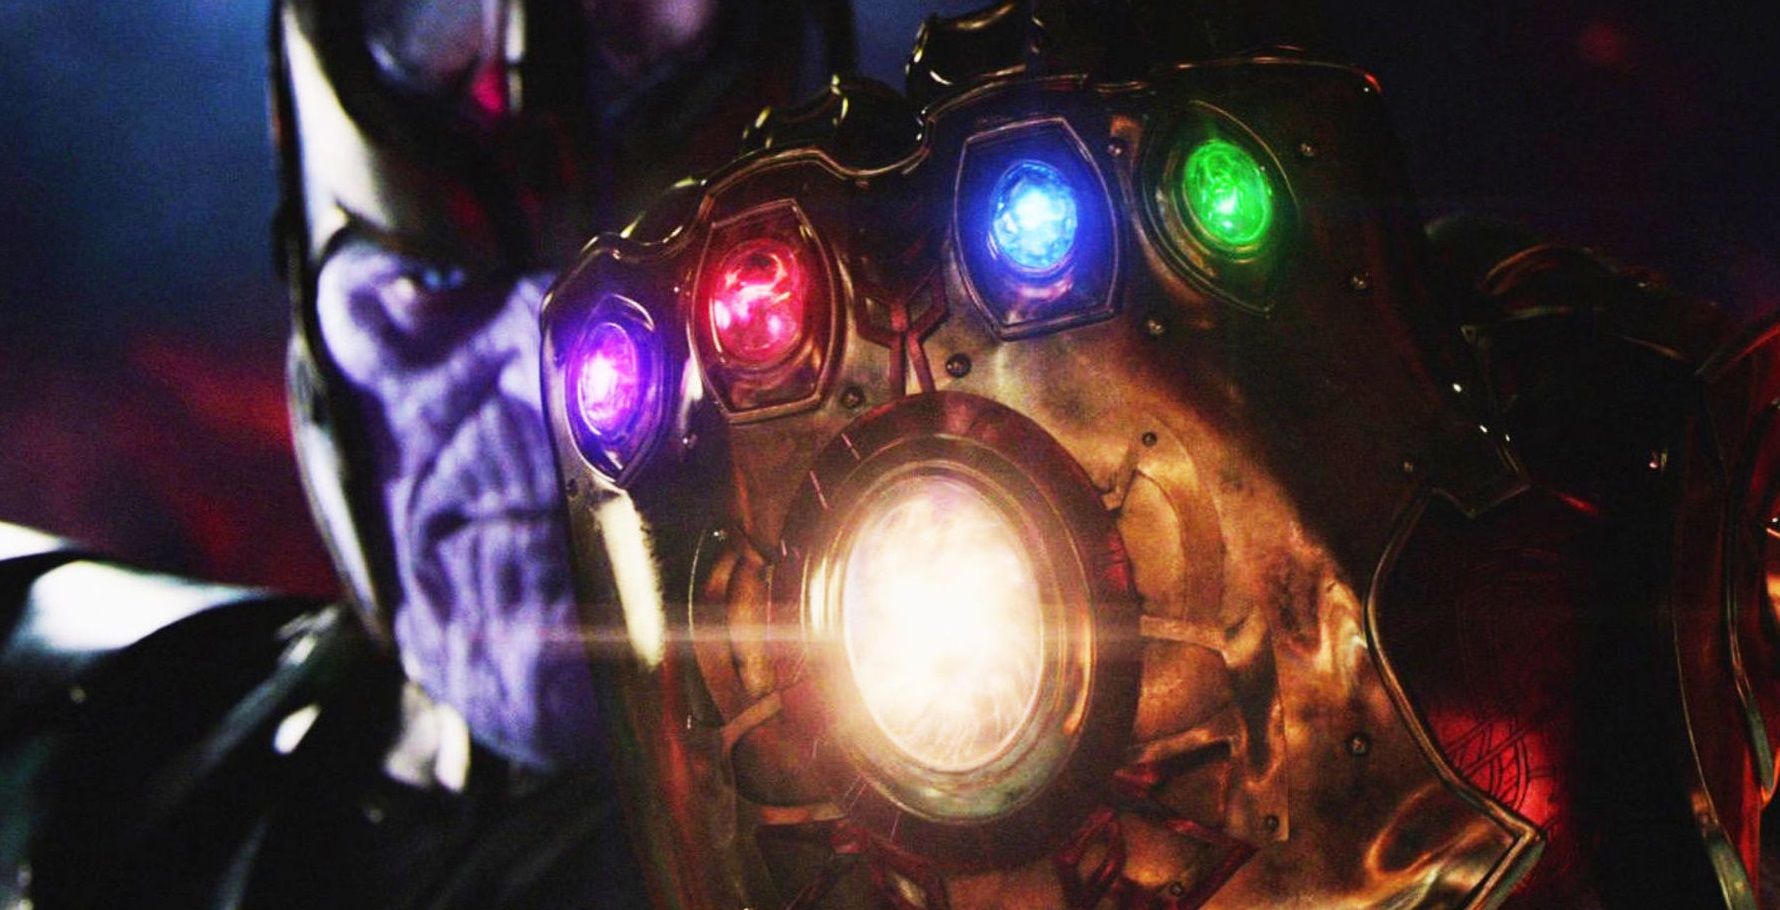 10 Questions About The Infinity Gauntlet Answered